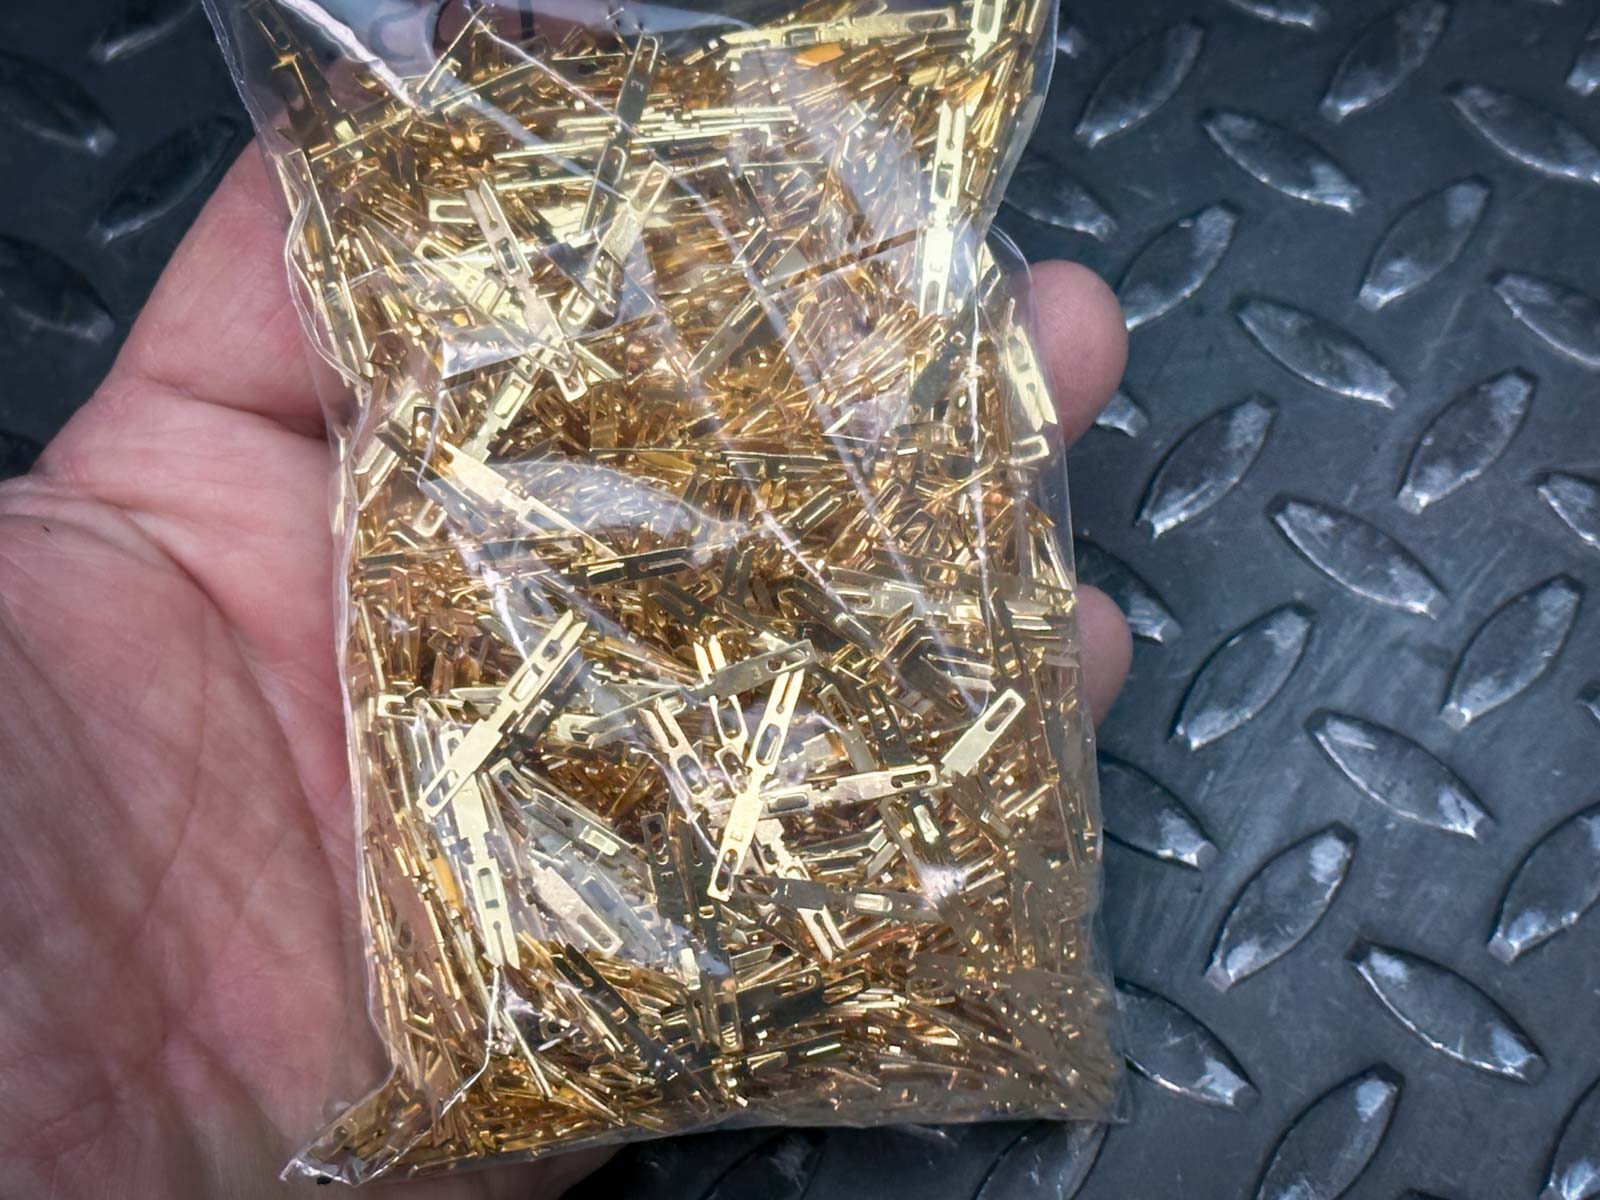 Scrap gold connector pins for precious metal recovery